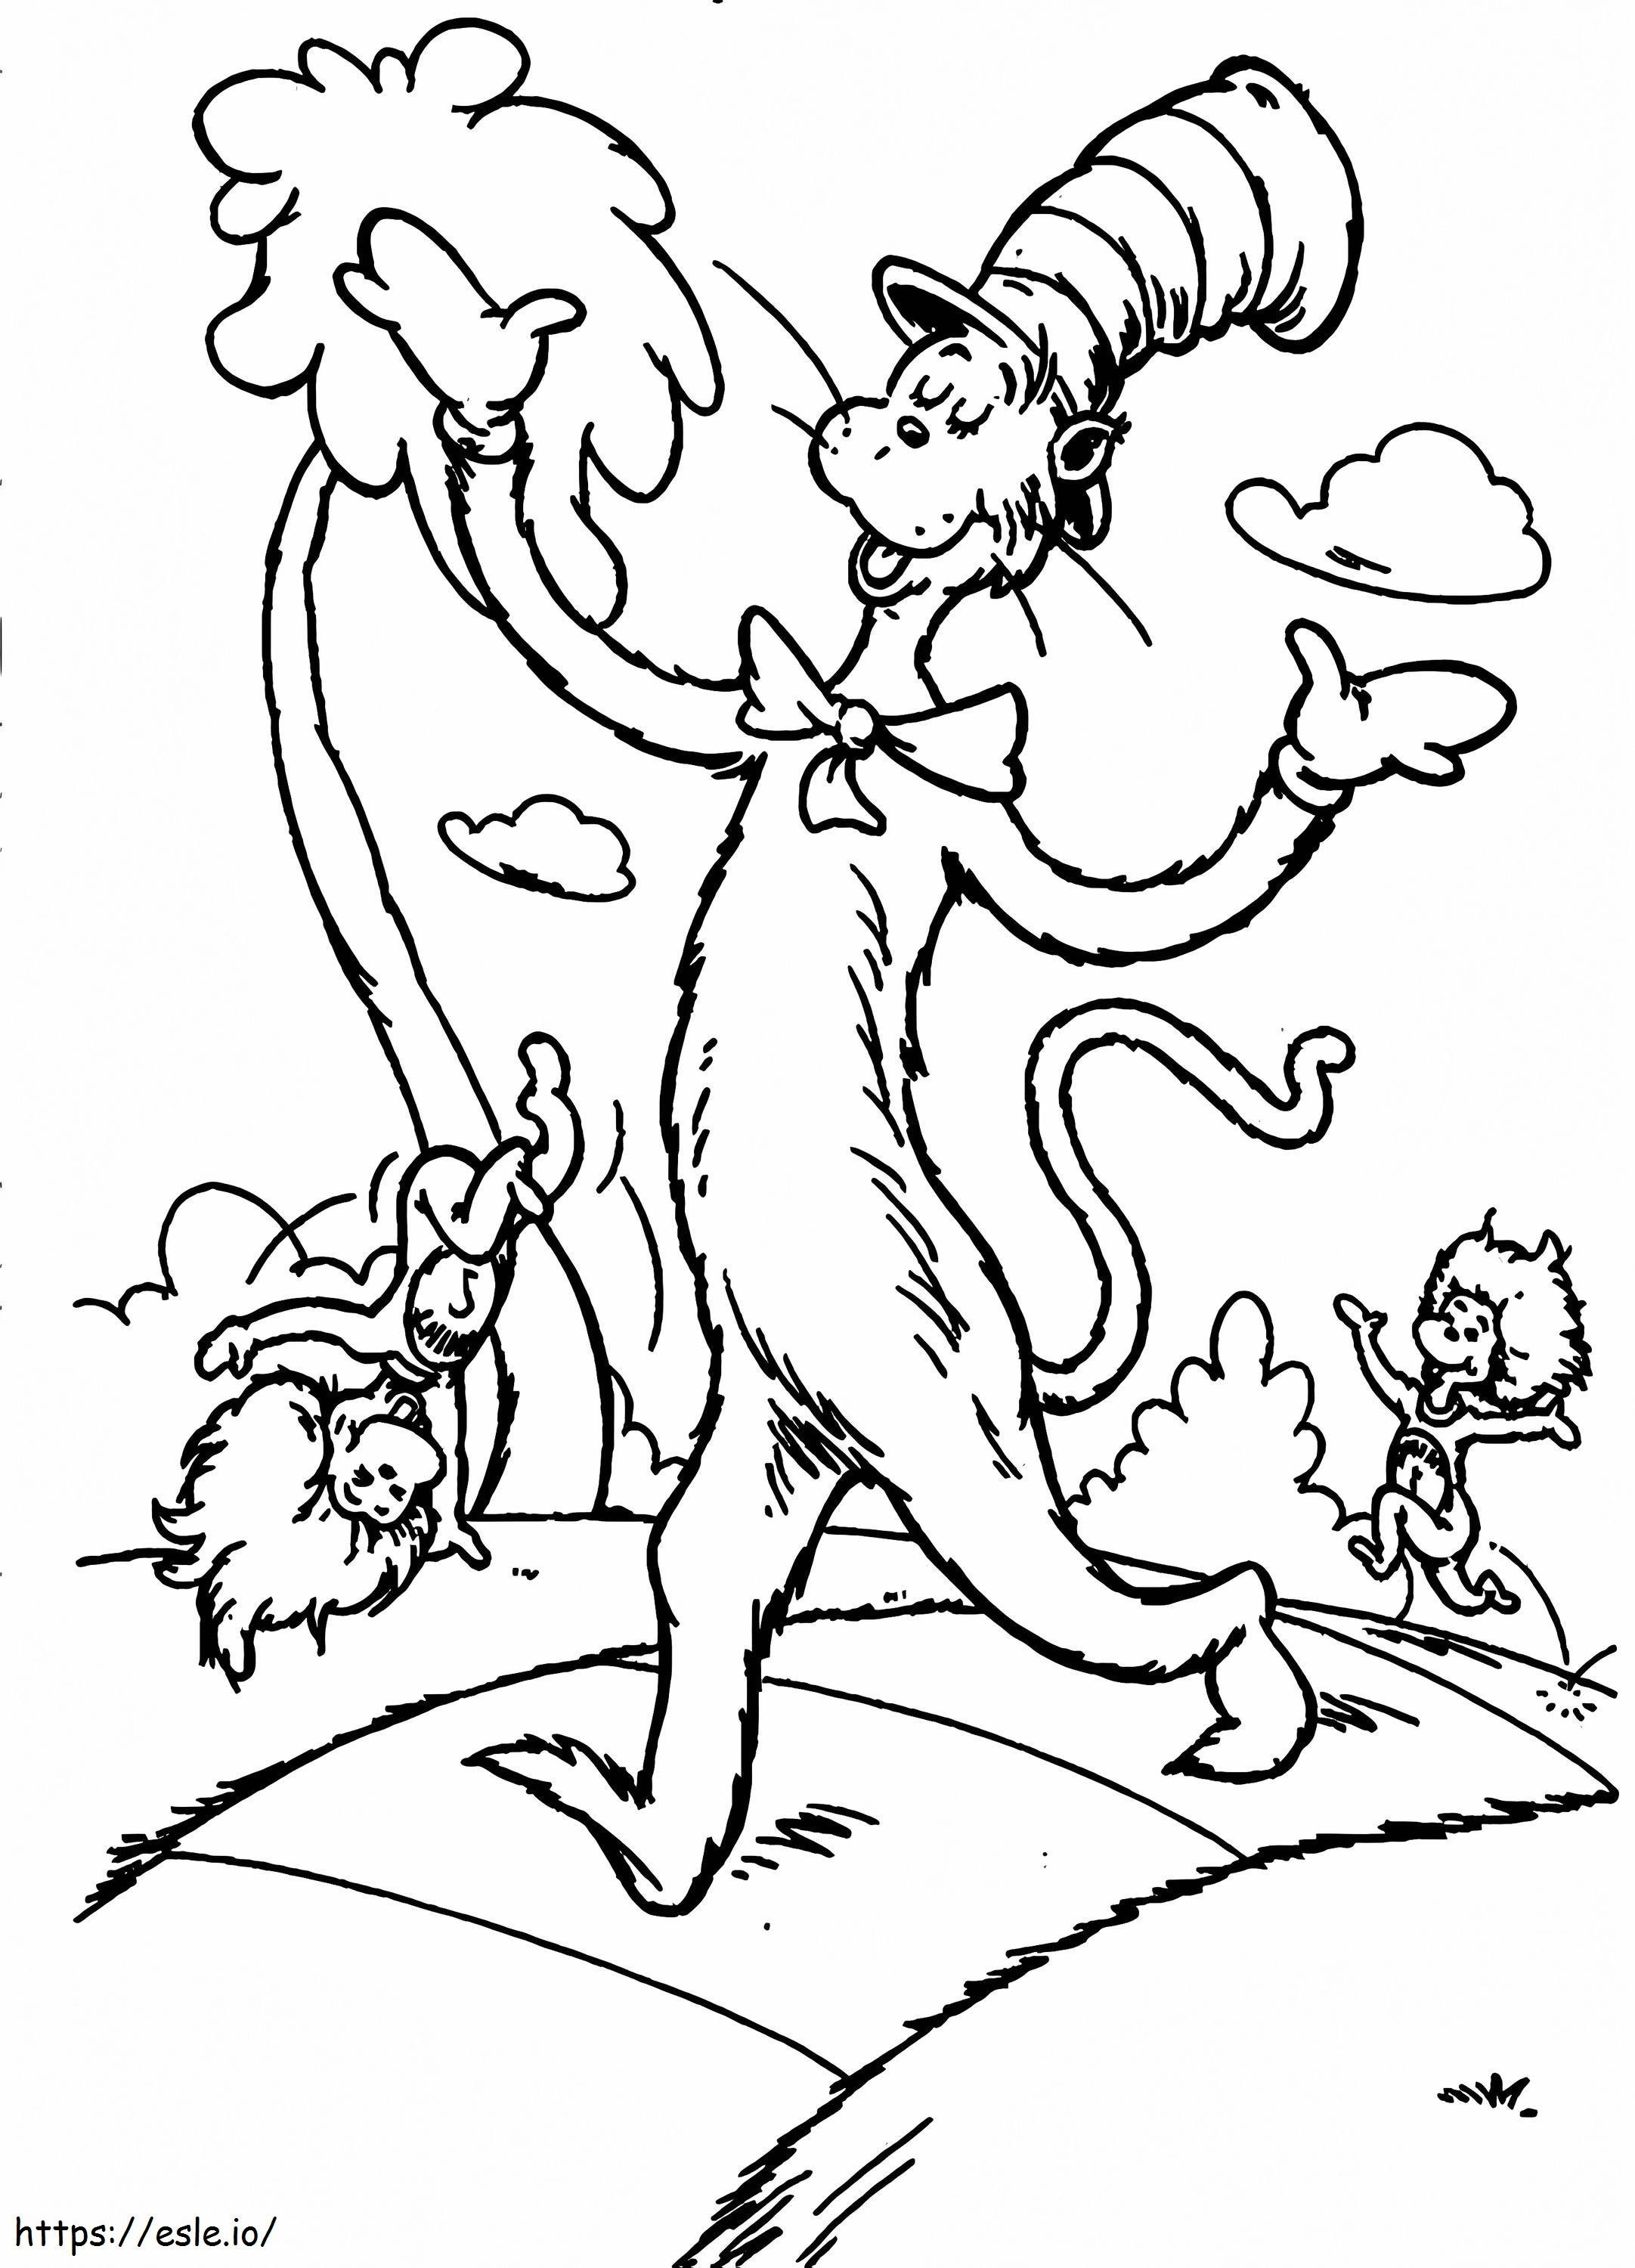 1580719789 Cat And The Hat coloring page